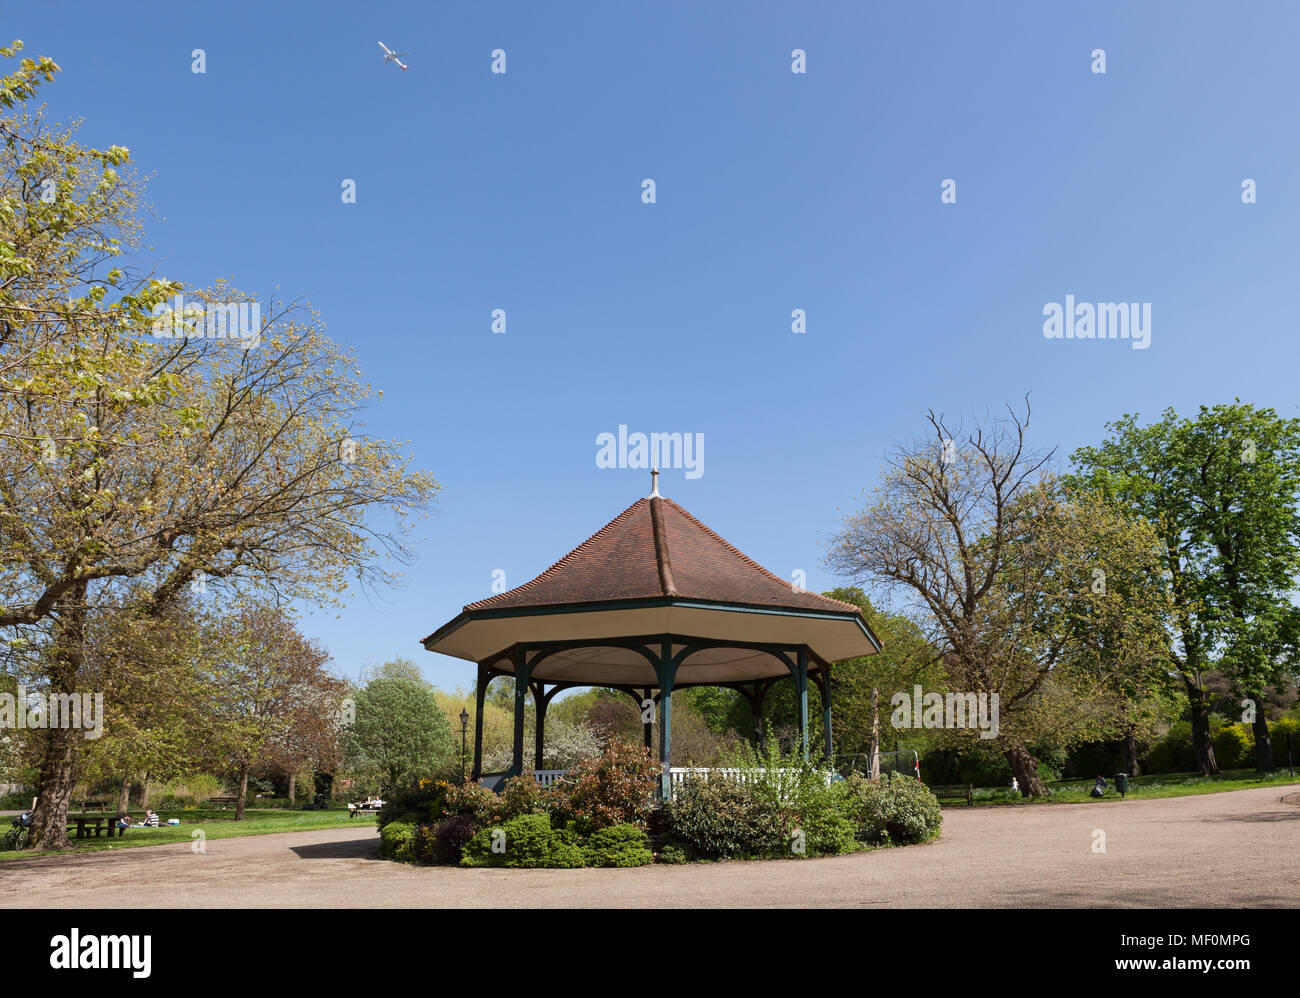 Rusking Park Bandstand, South London. Stock Photo